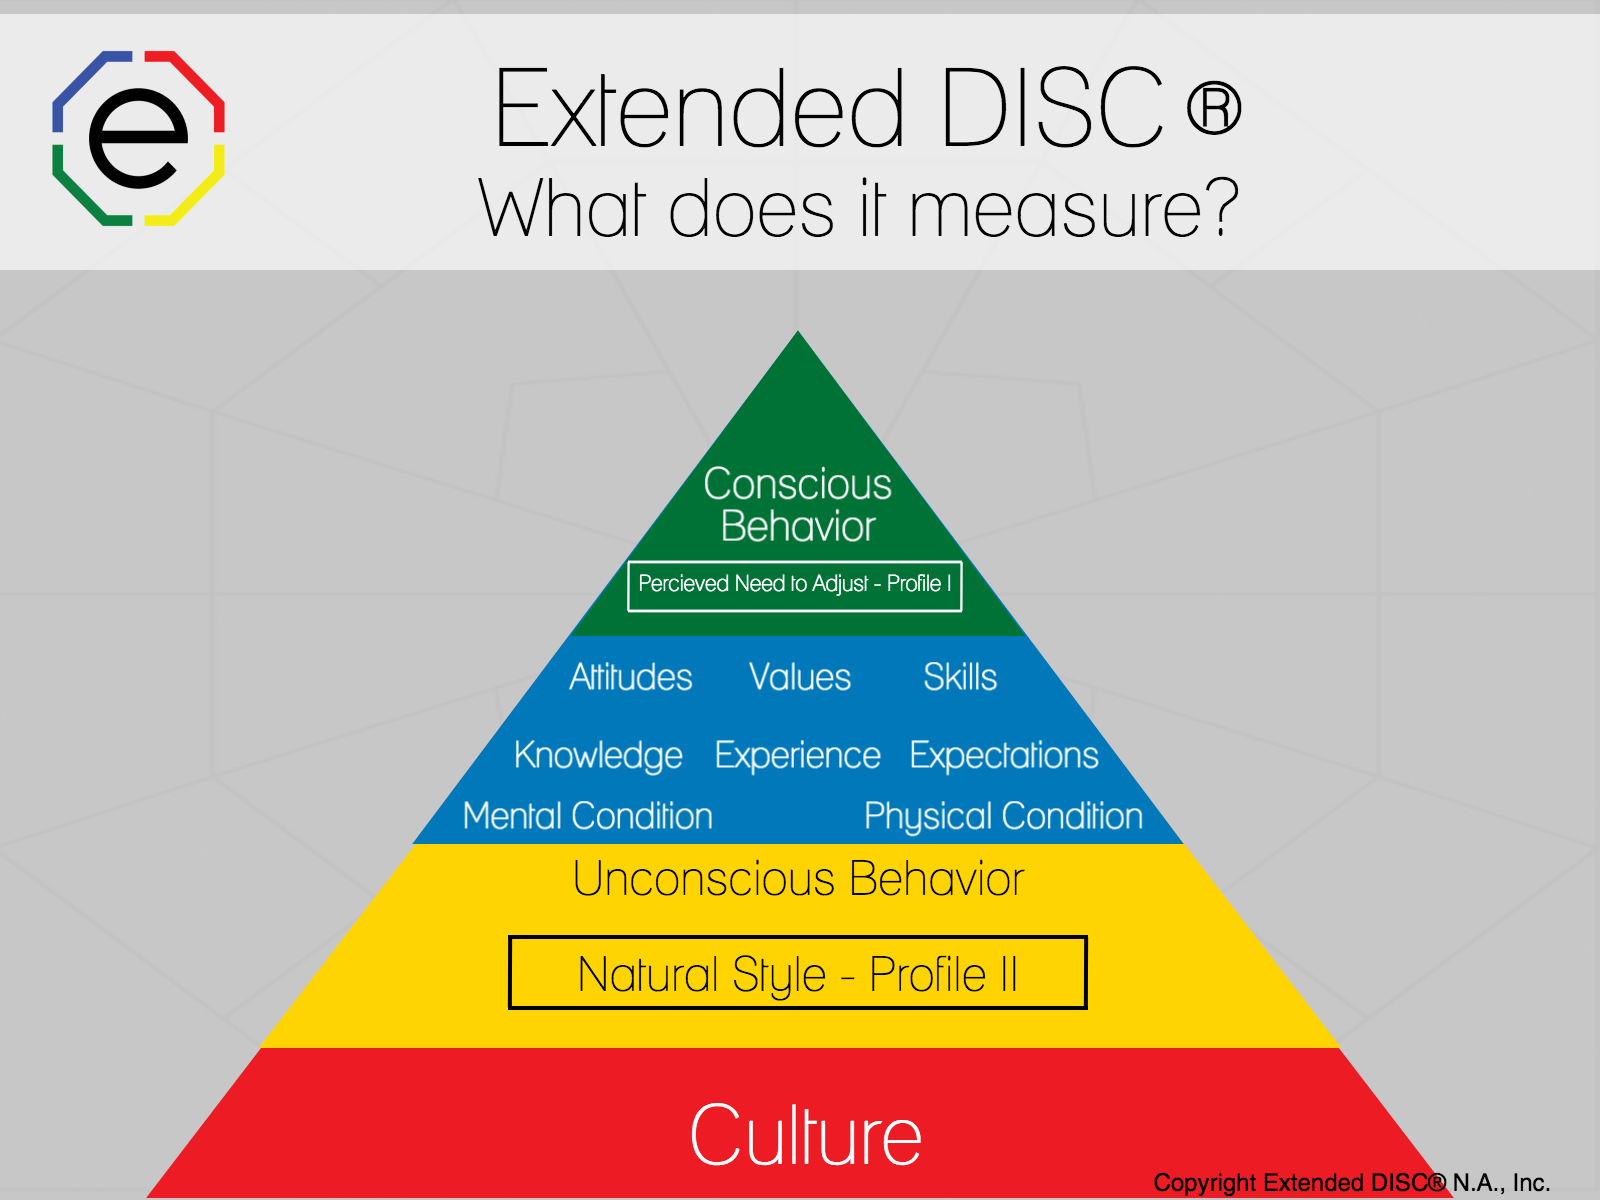 Extended DISC® Model: What the tool does and does not measure